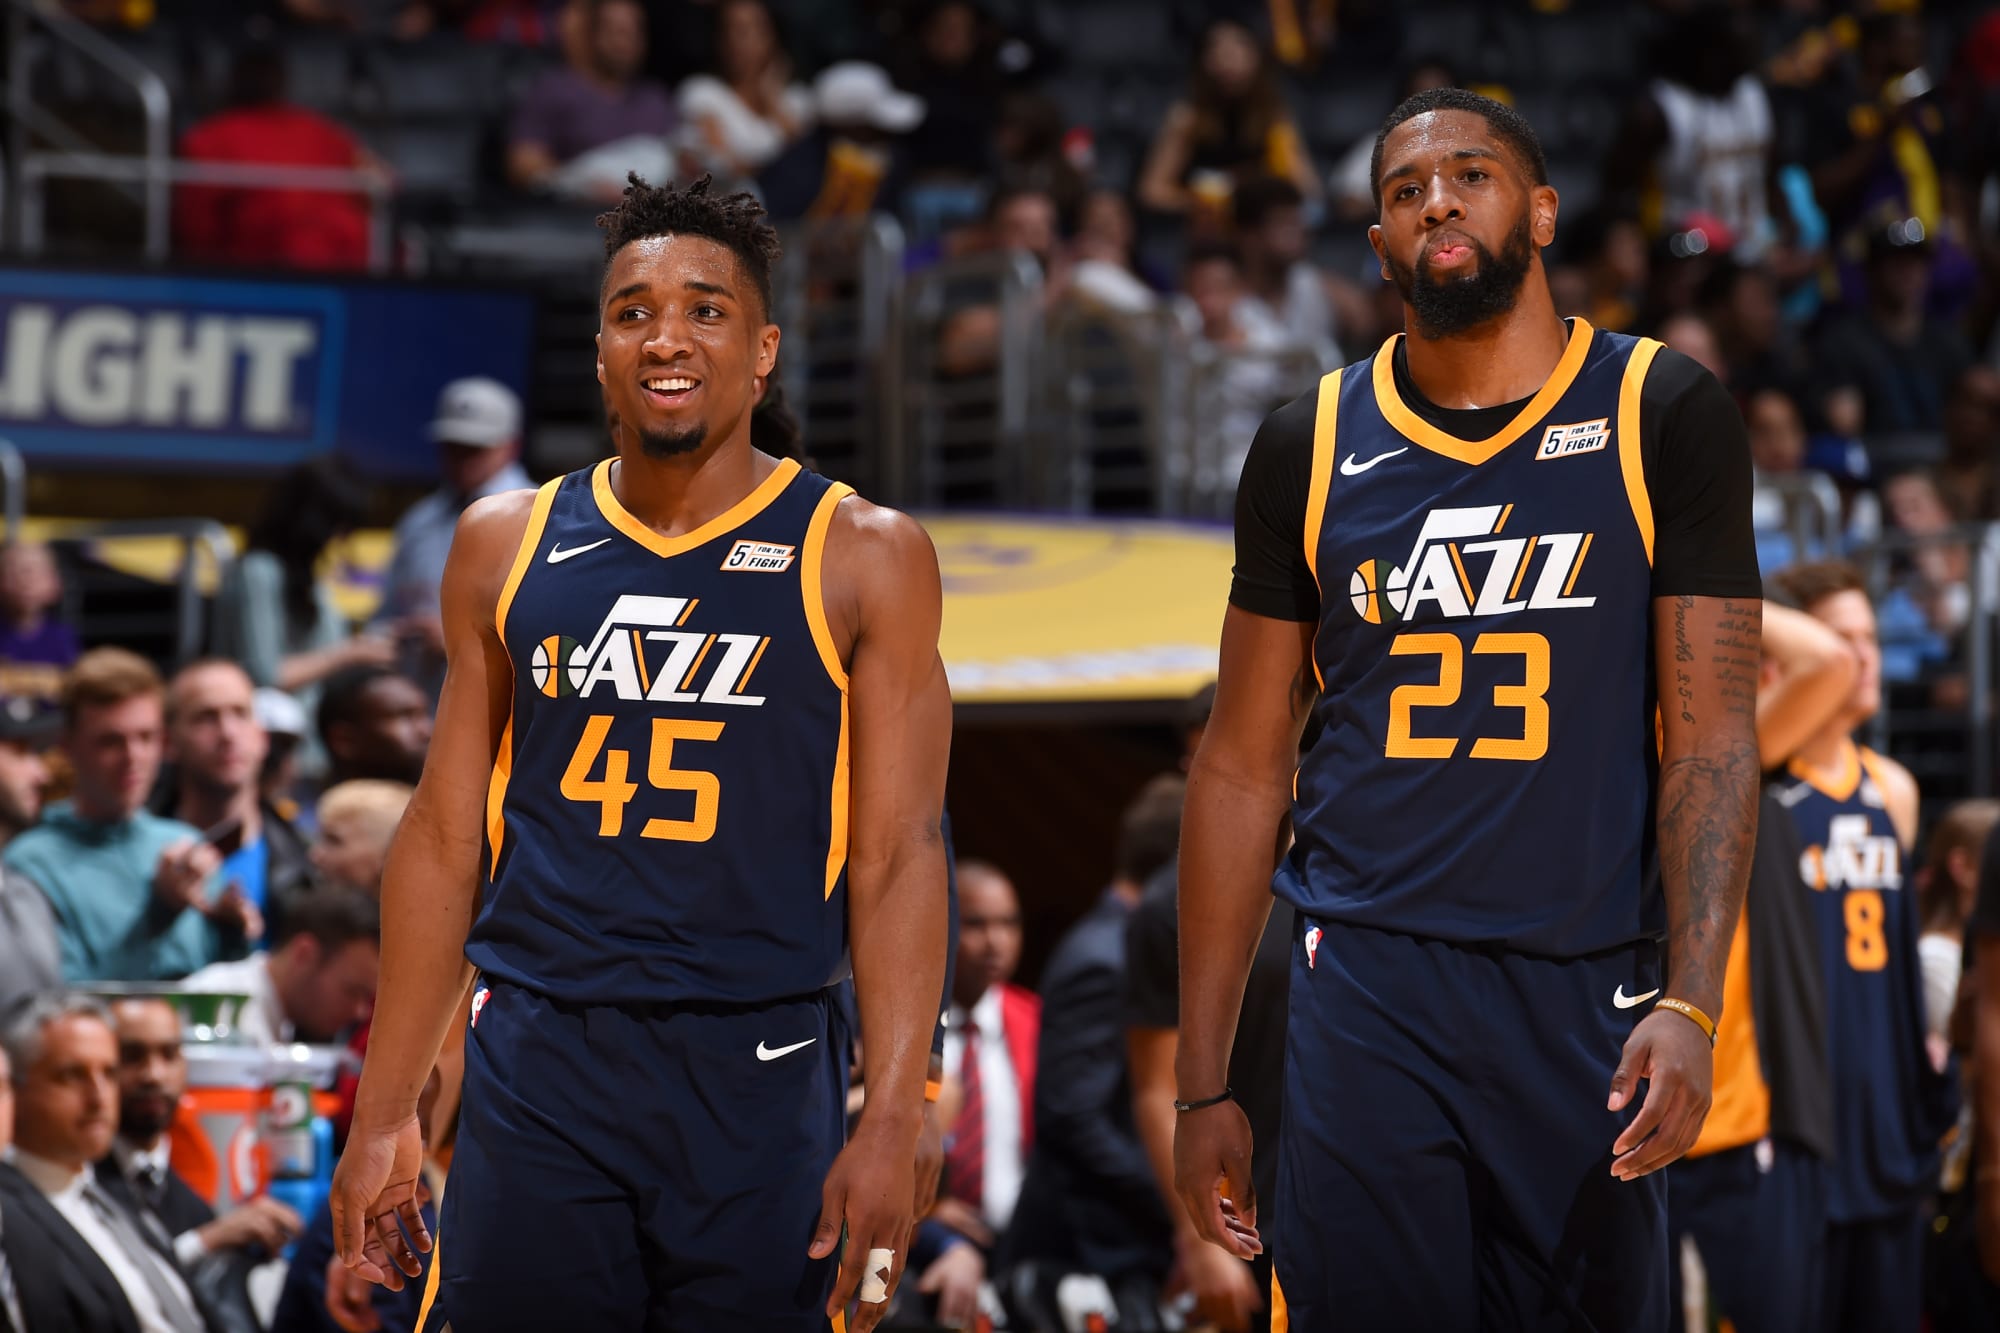 Utah Jazz officially clinch playoff berth with win over Lakers